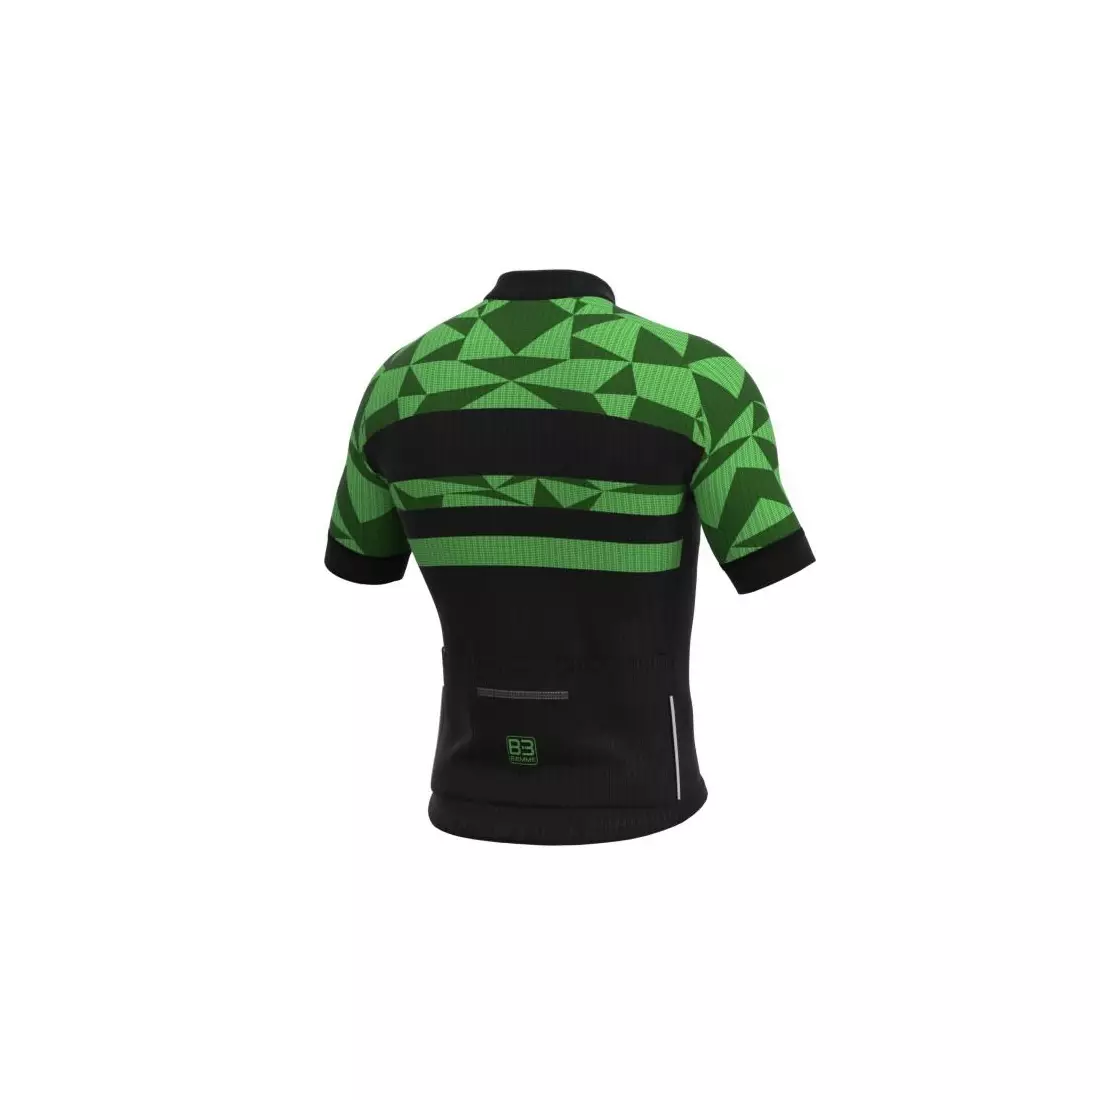 Biemme men's cycling jersey SEMPIONE black and green